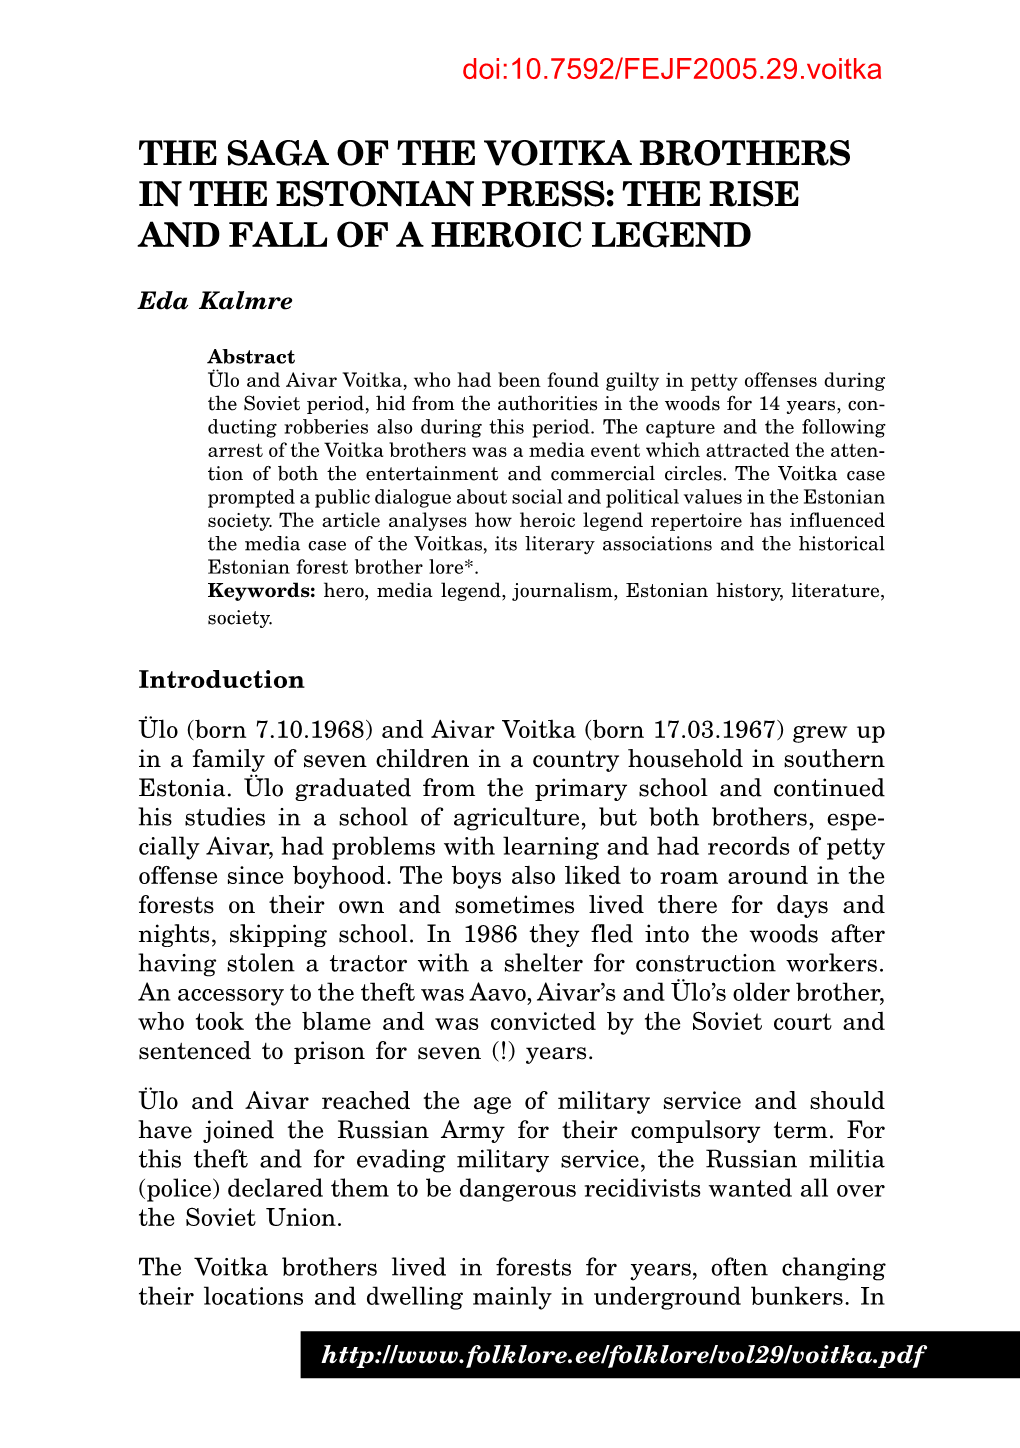 The Saga of the Voitka Brothers in the Estonian Press: the Rise and Fall of a Heroic Legend